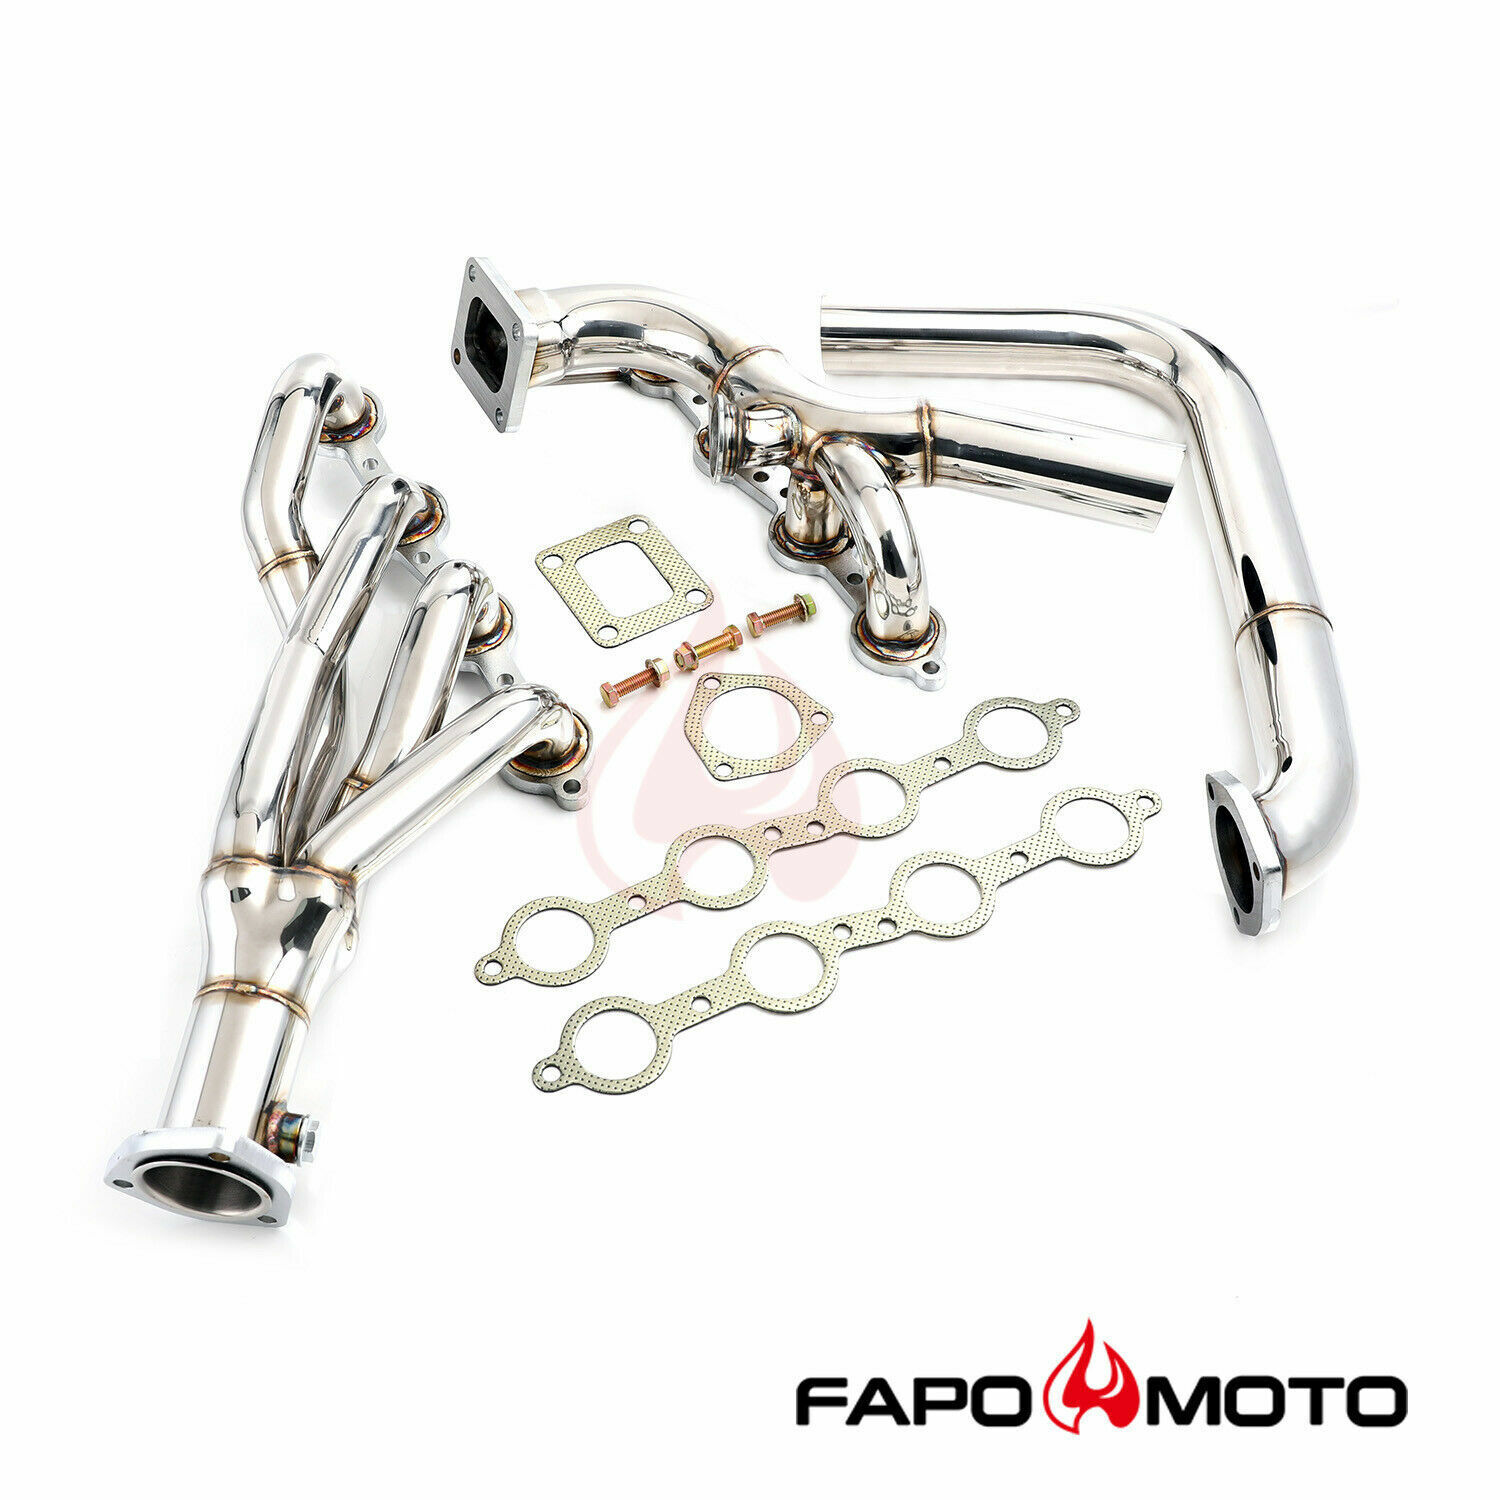 FAPO Single Turbo Headers for LSX LS2 T4 Top Mount Swap Crossover with 44mm WG